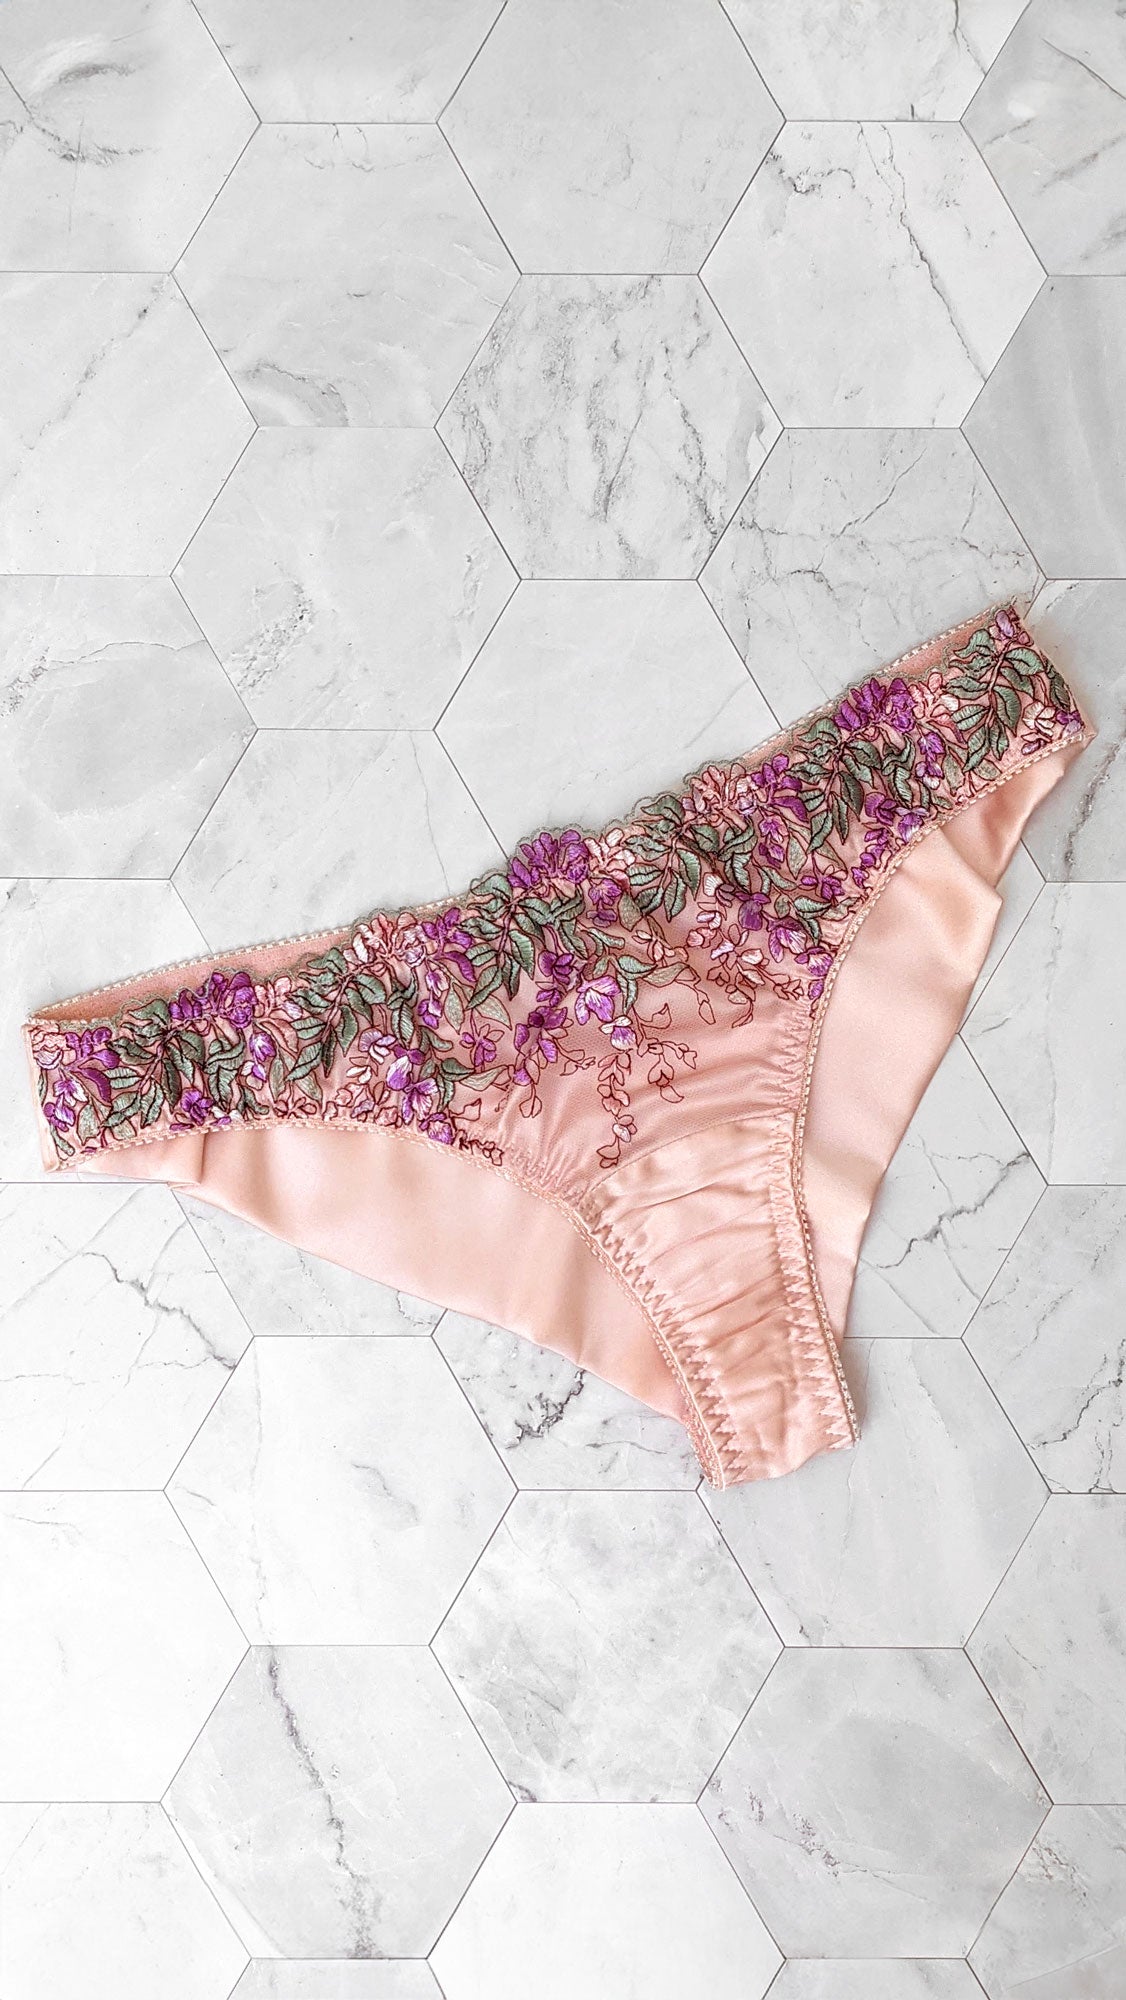 Wisteria pink silk panties with floral embroidery